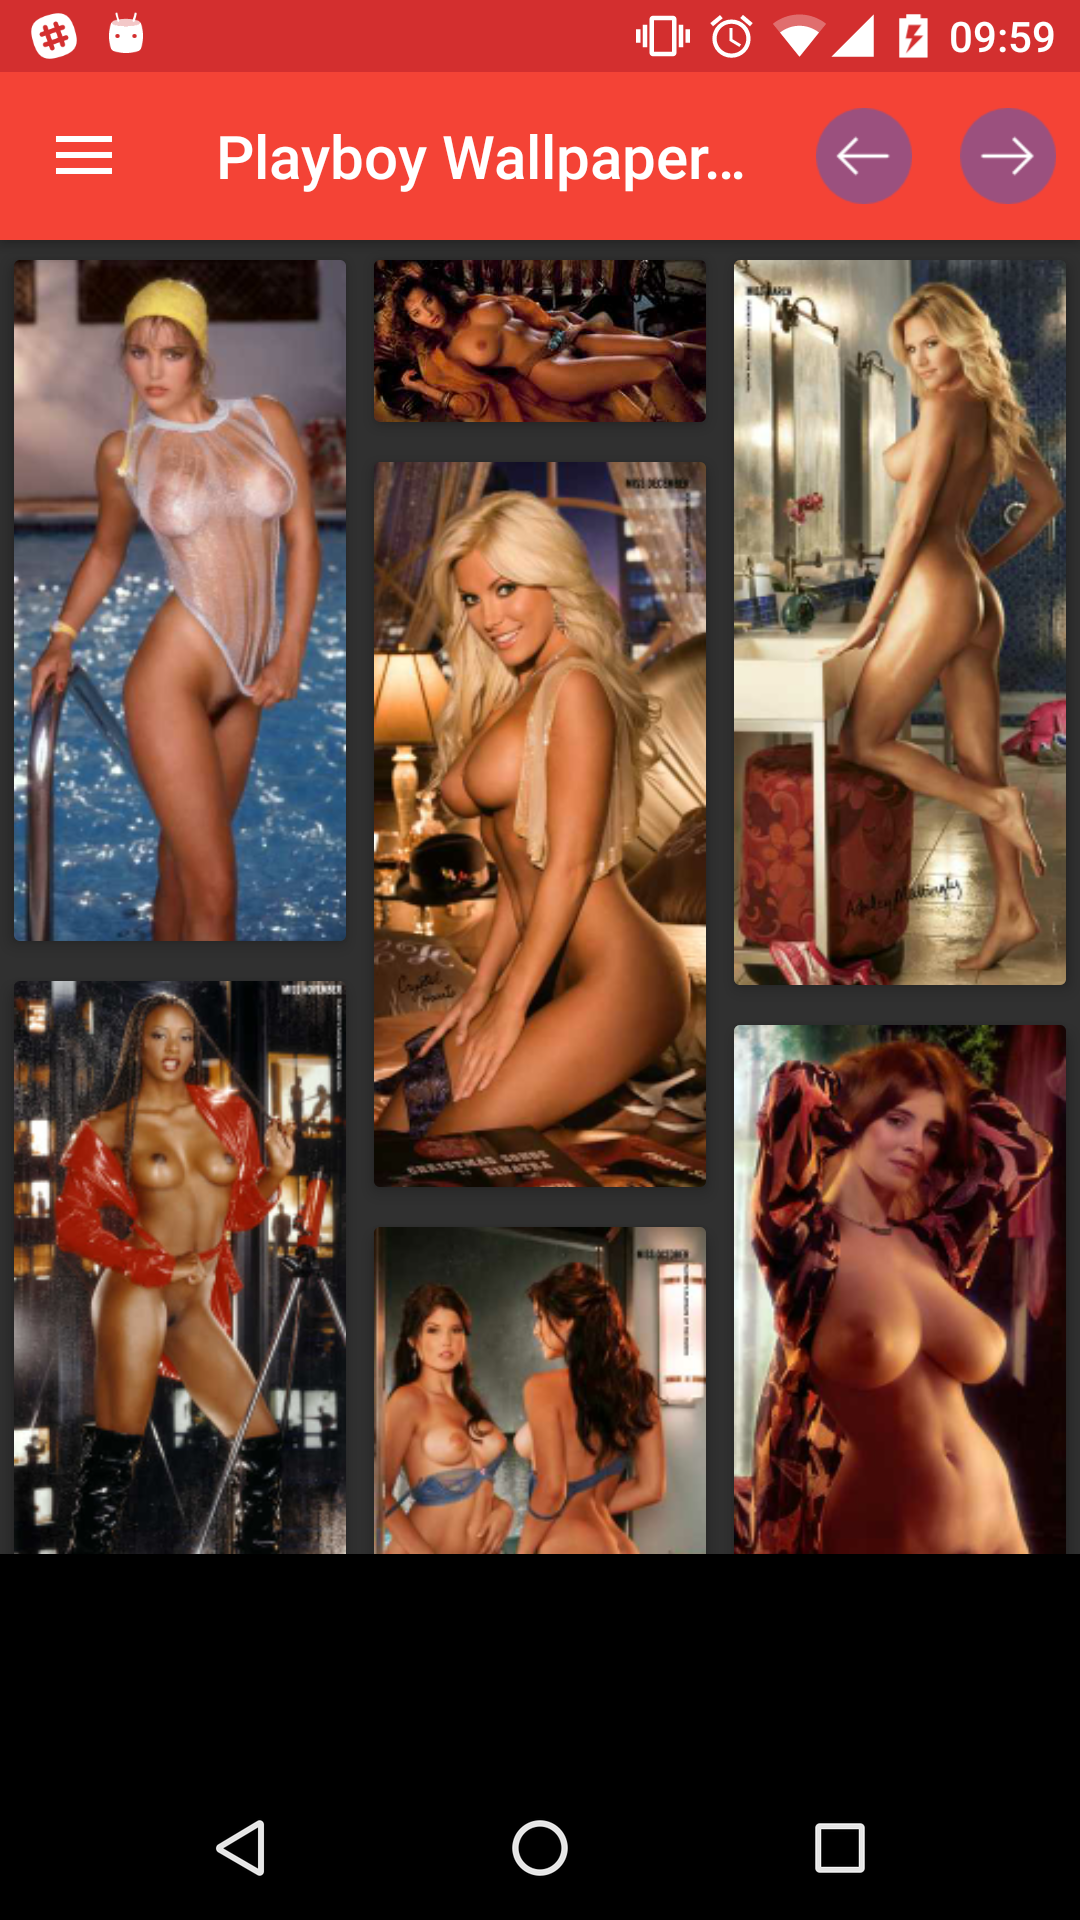 Playboy wallpapers hentai,erotic,apps,wallpapers,backgrounds,saxy,pics,hot,latest,playboy,centerfolds,download,maker,sexyteengalleries,gallery,hentei,apk,app,pic,henati,henta,porn,customization,photo,personalization,editor,sexy,magazine